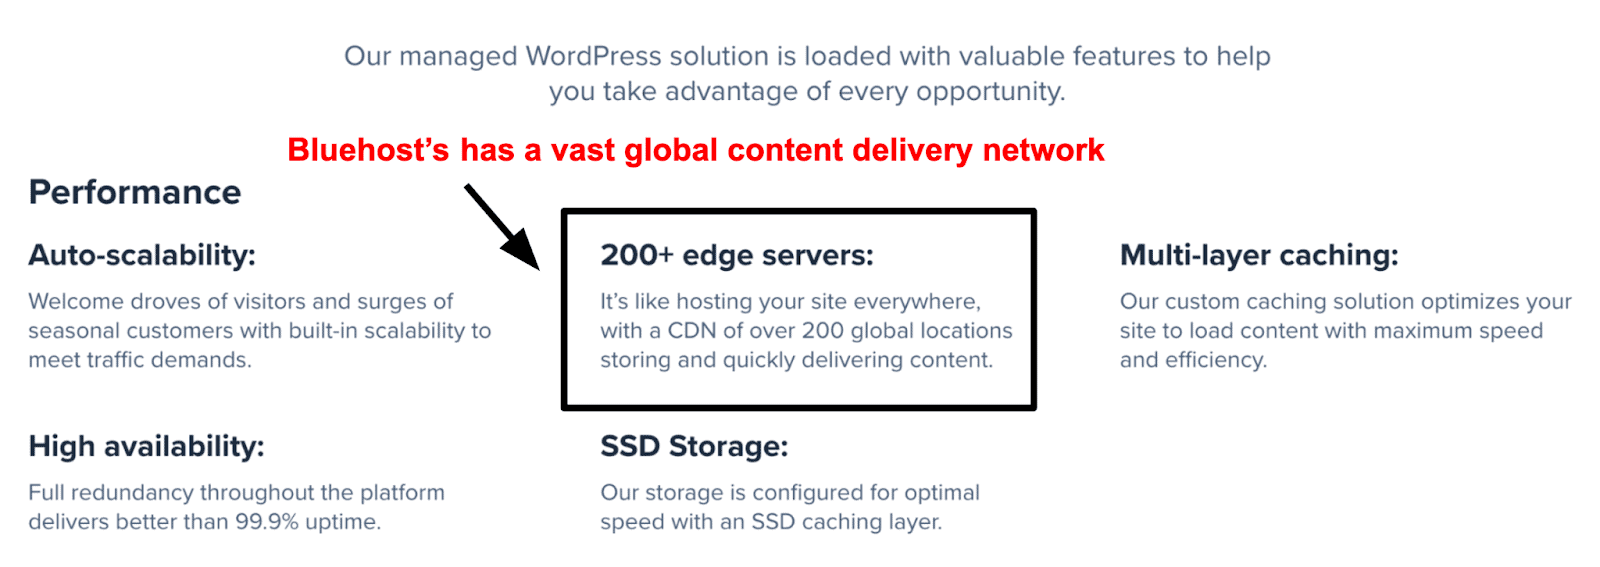 bluehost-managed-wordpress-features-and-cdn